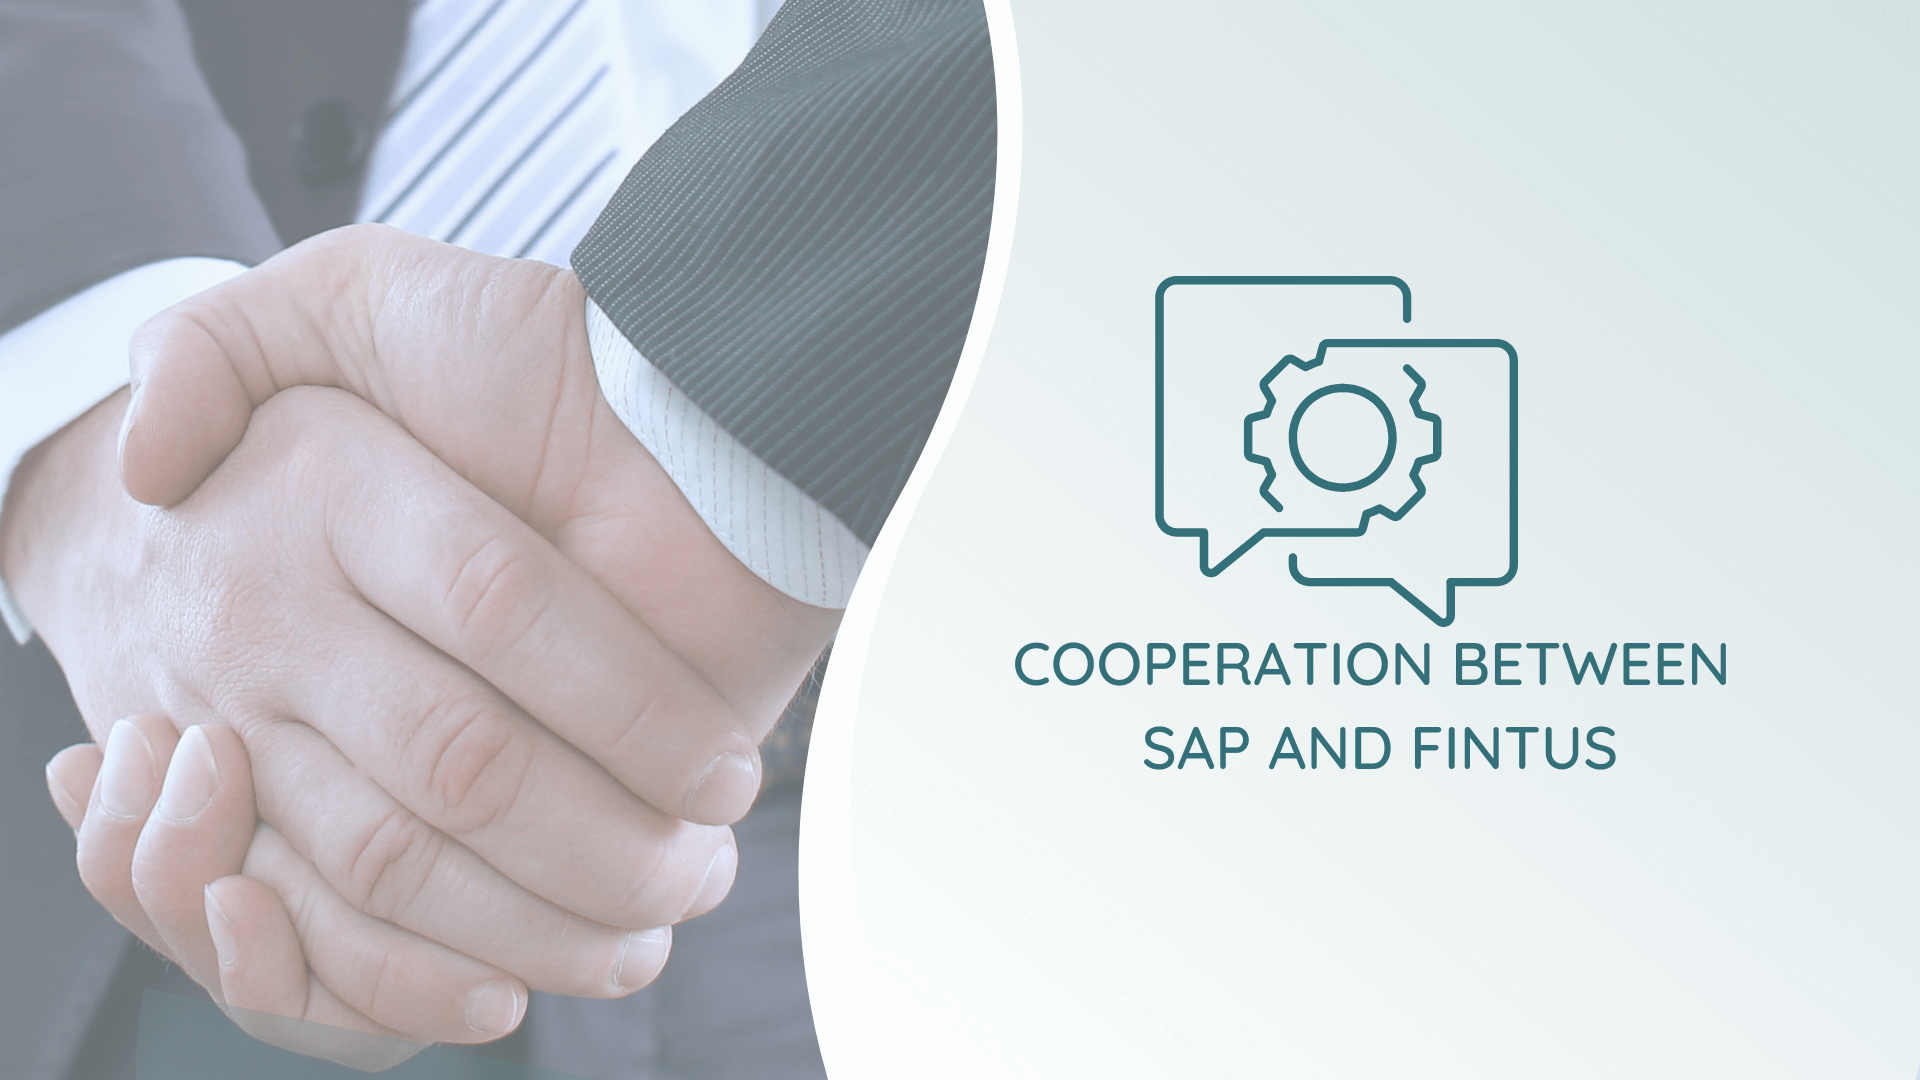 Cooperation between SAP and fintus